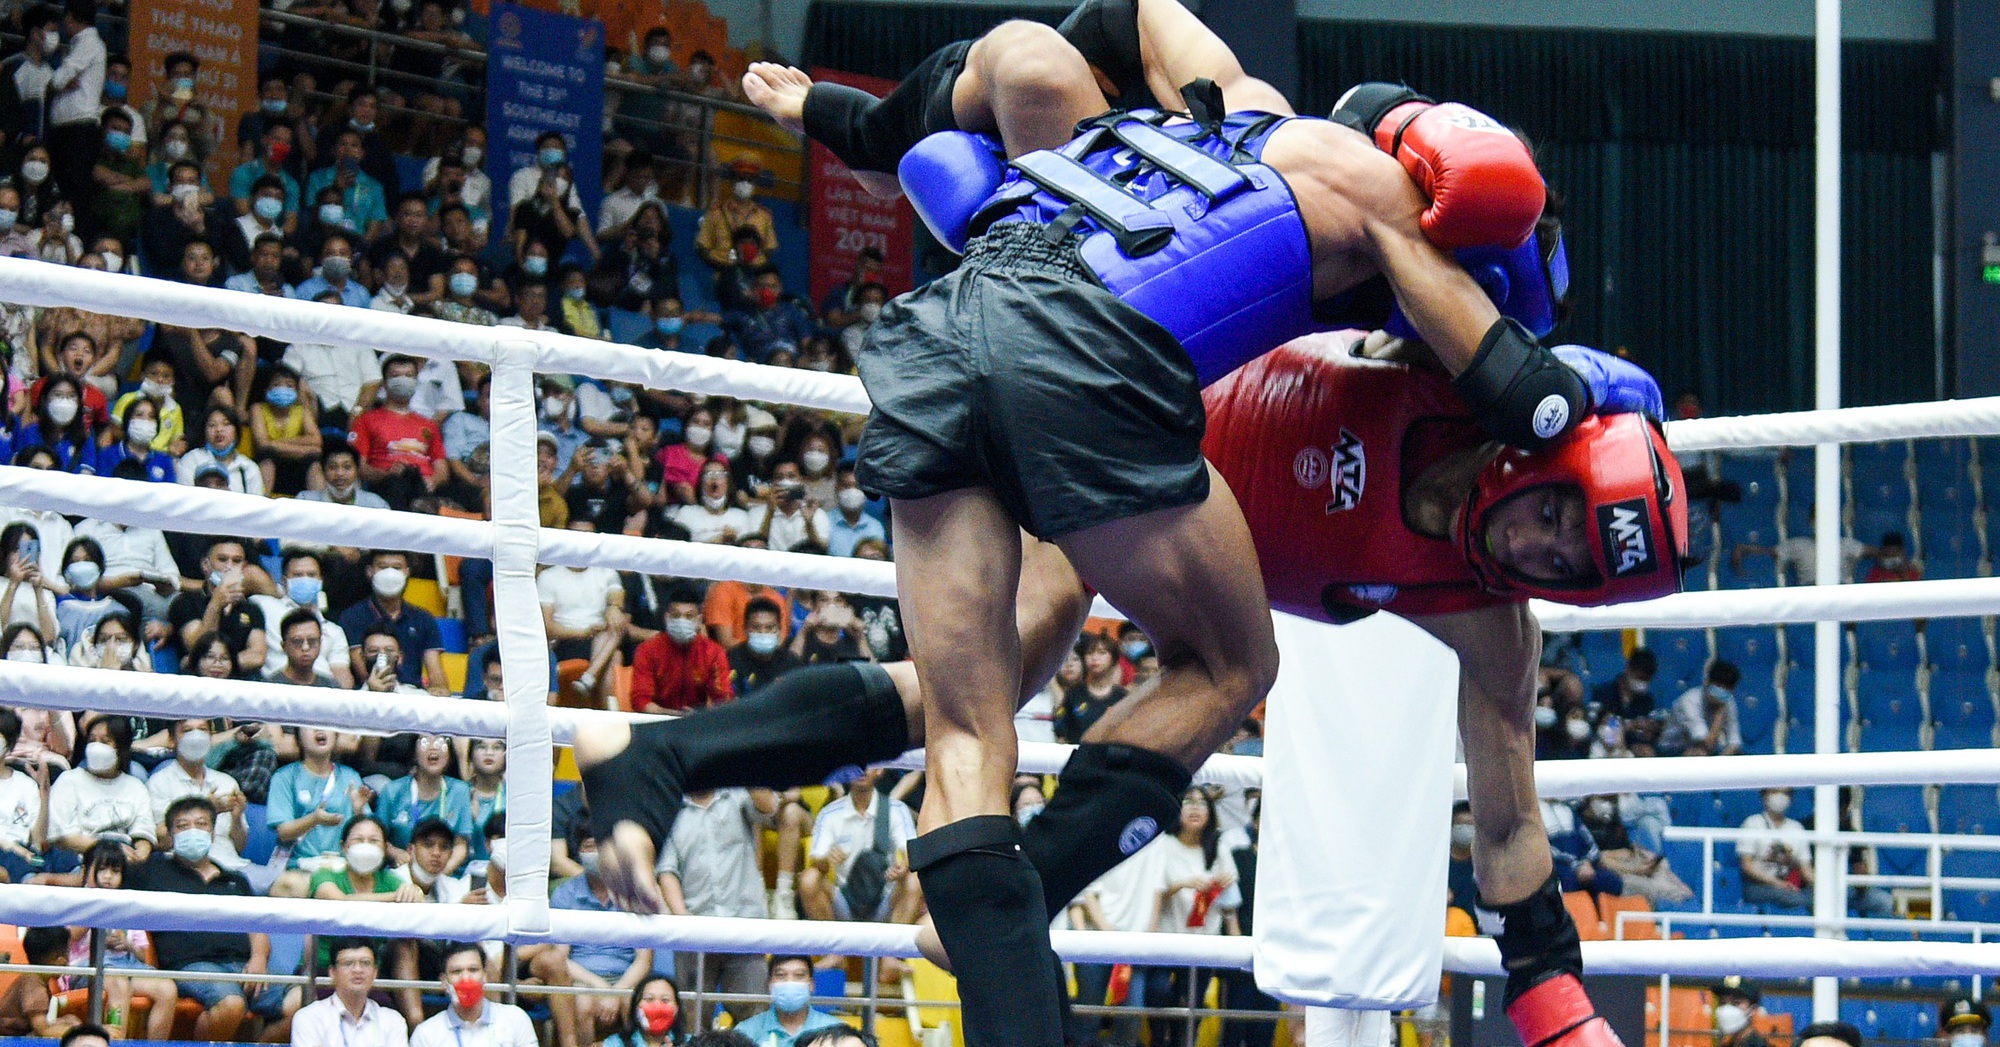 Nguyen Tran Duy Nhat defeated the Philippines opponent, competed for gold